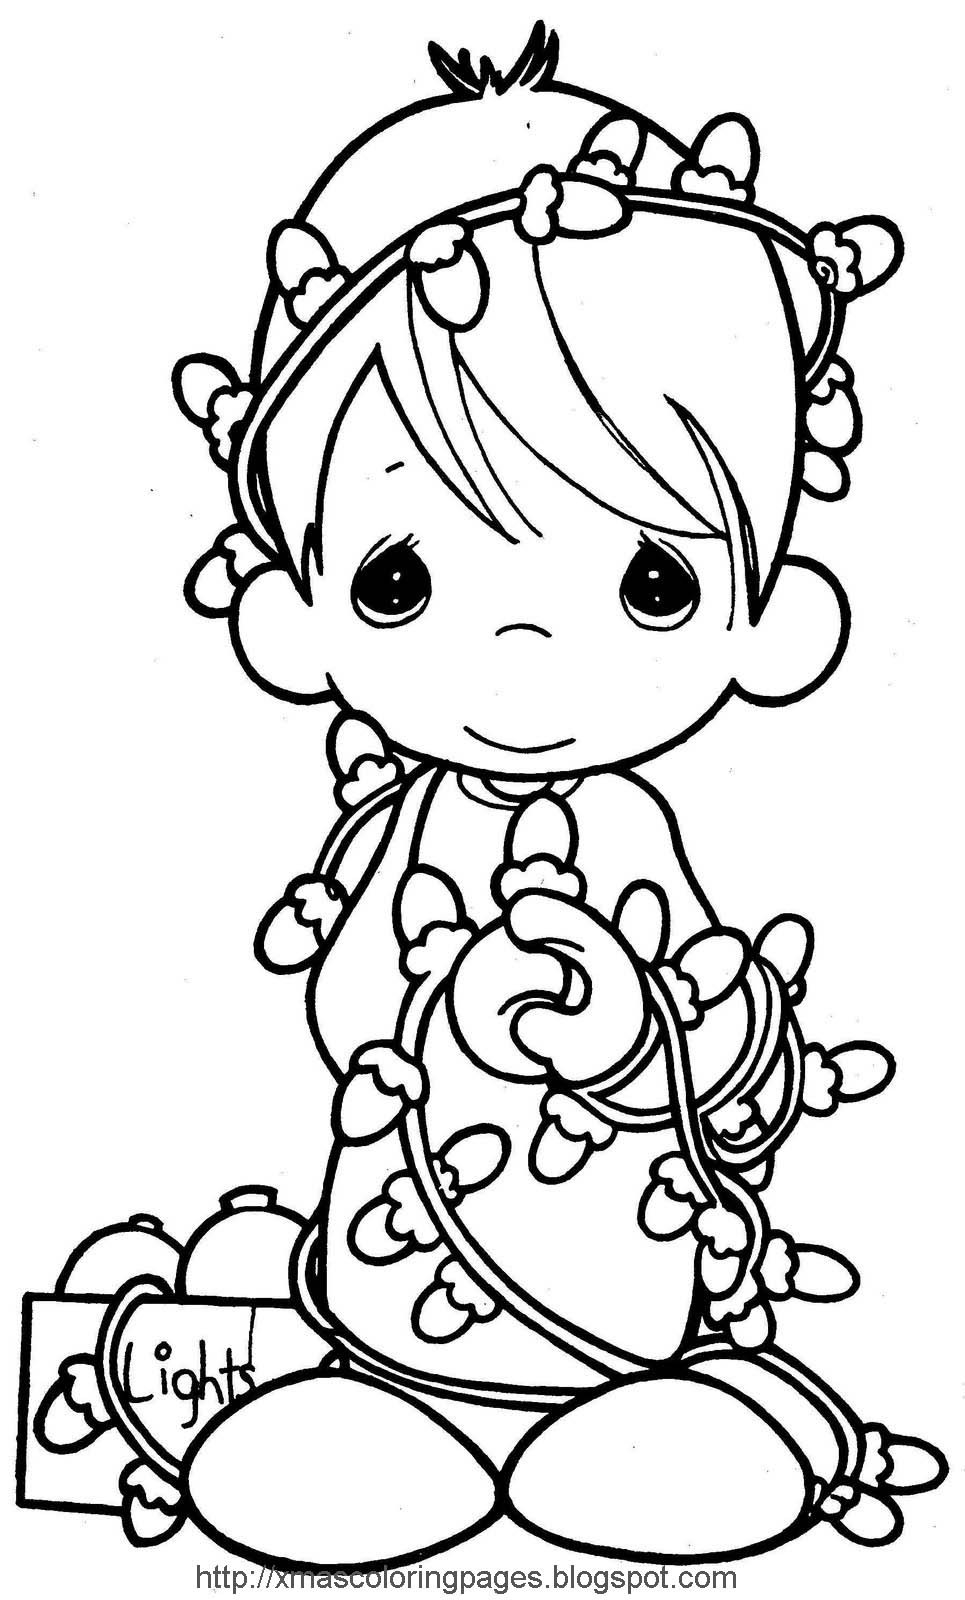 Printable Coloring Pages Christmas
 XMAS COLORING PAGES